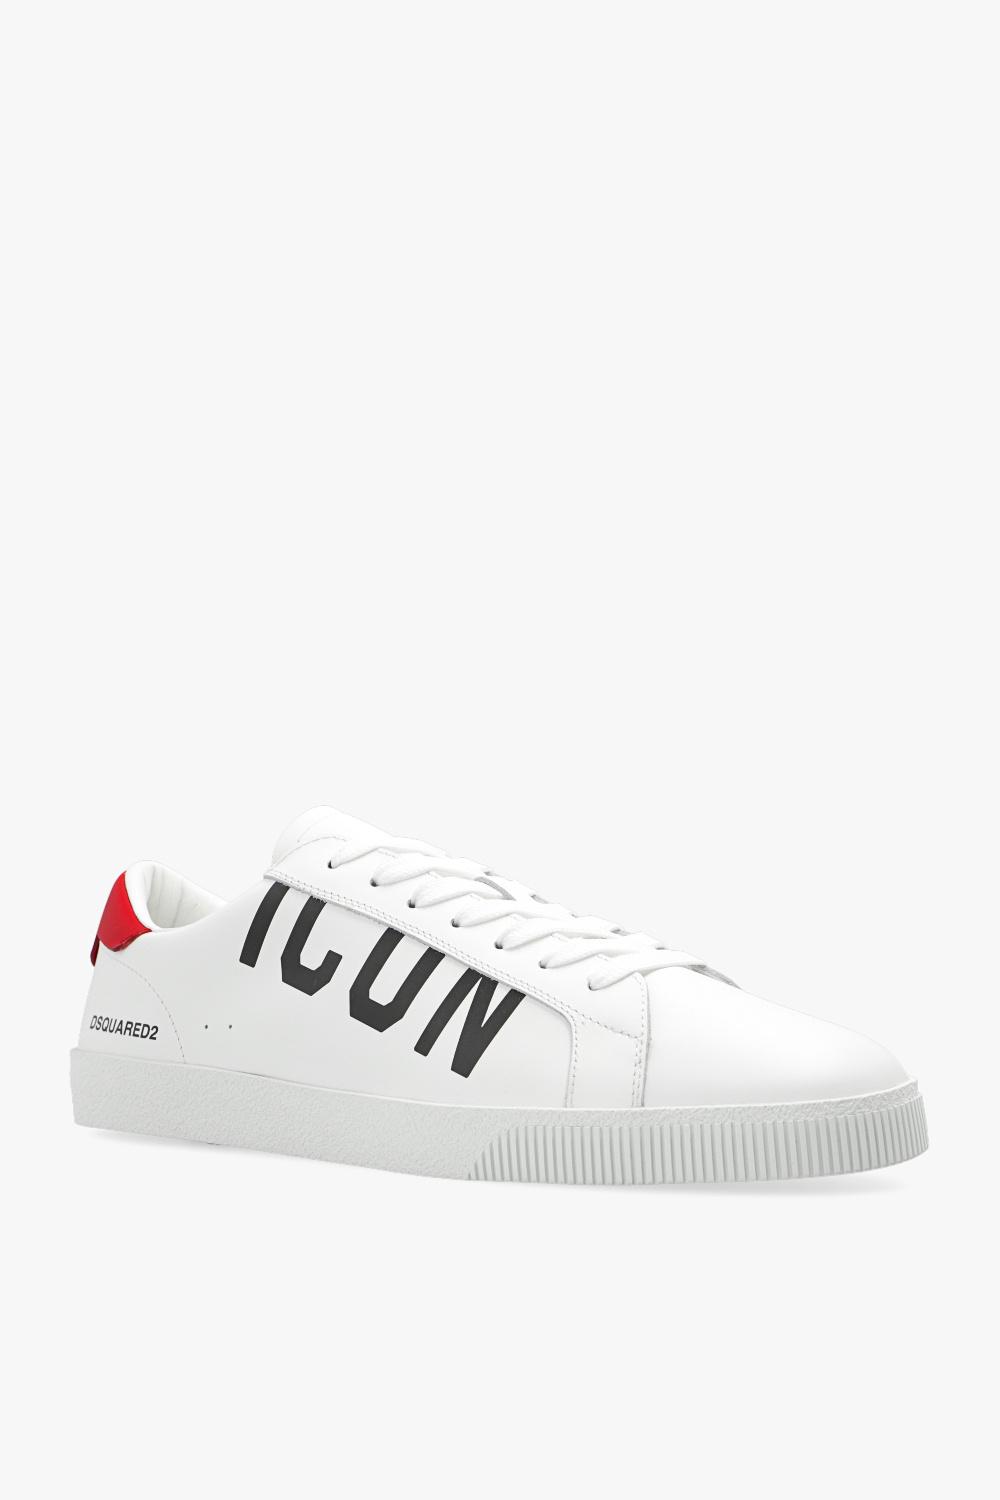 Mens Trainers DSquared² Trainers Save 55% DSquared² Leather Cassetta Sneakers in White for Men 